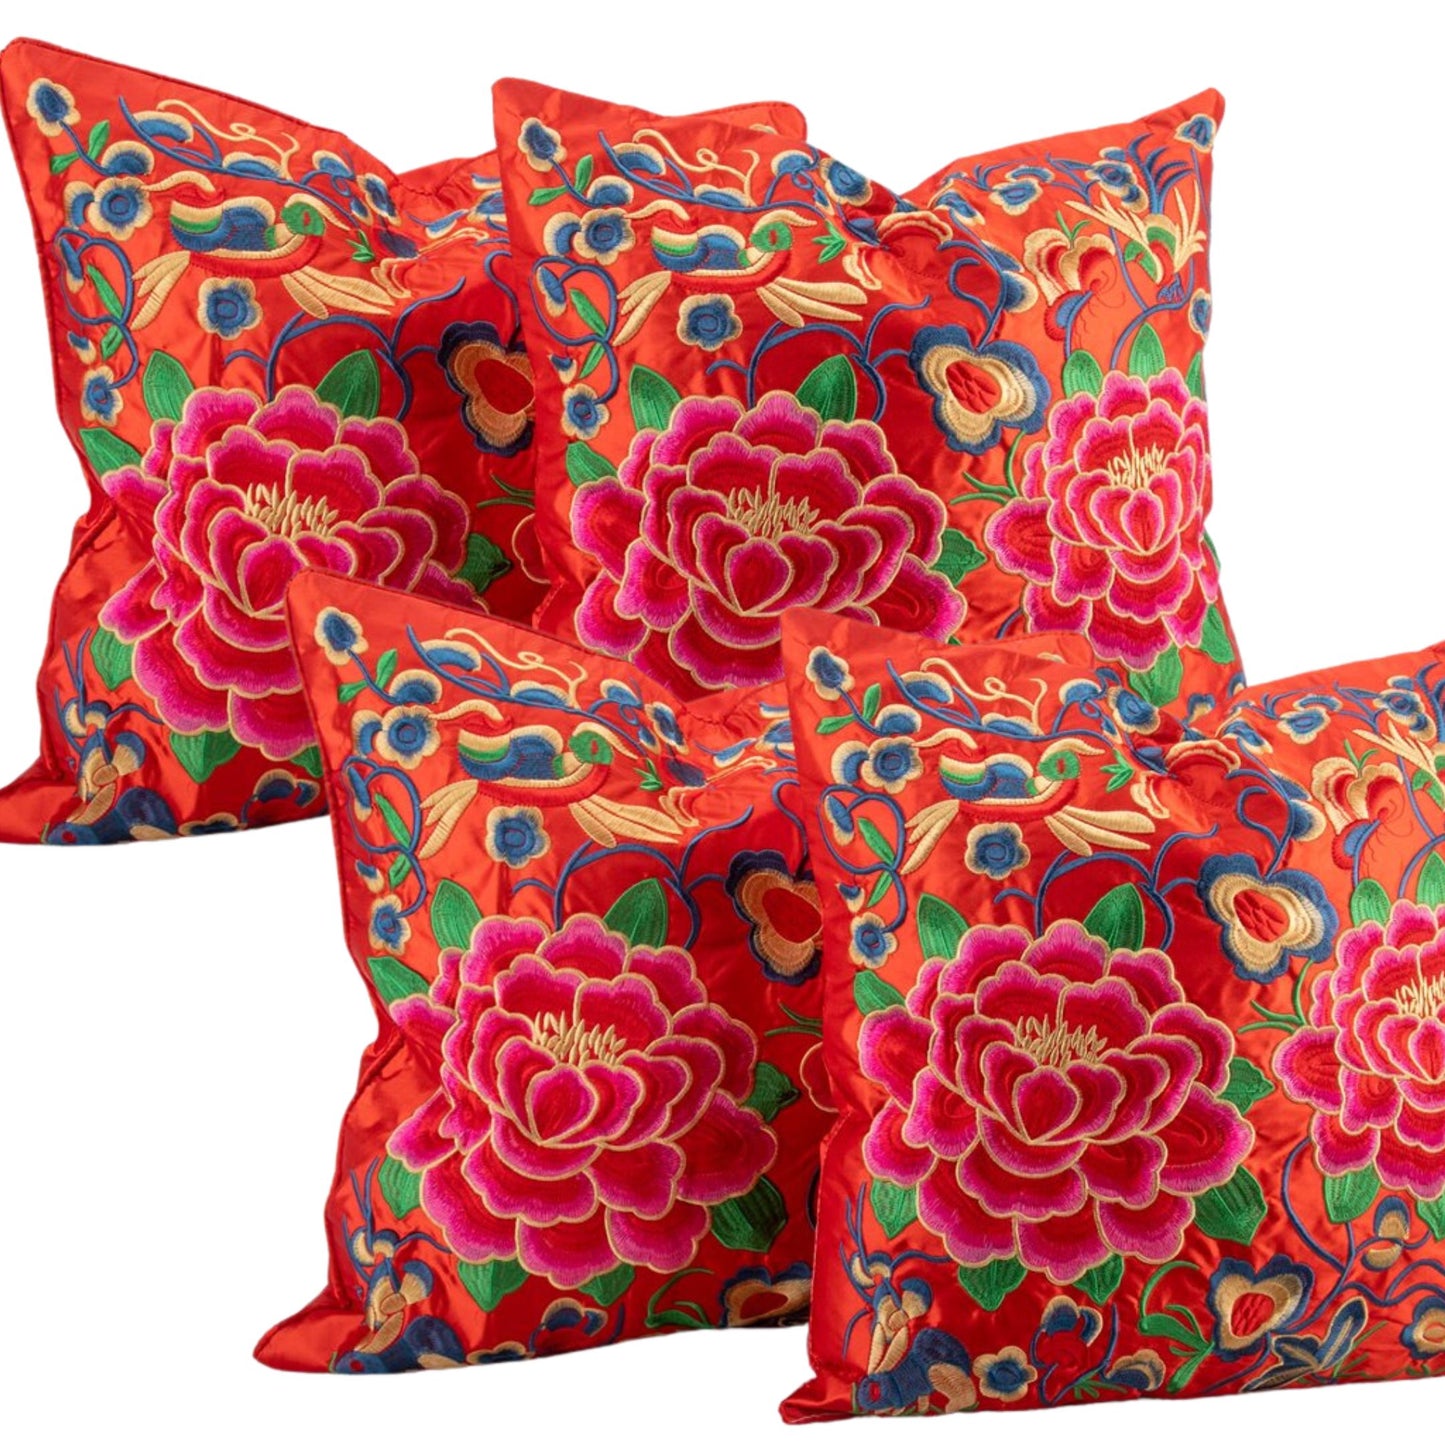 NEW - Pink & Orange, 20x20" Silk Peony Floral, Embroidered Pillow W/ Insert